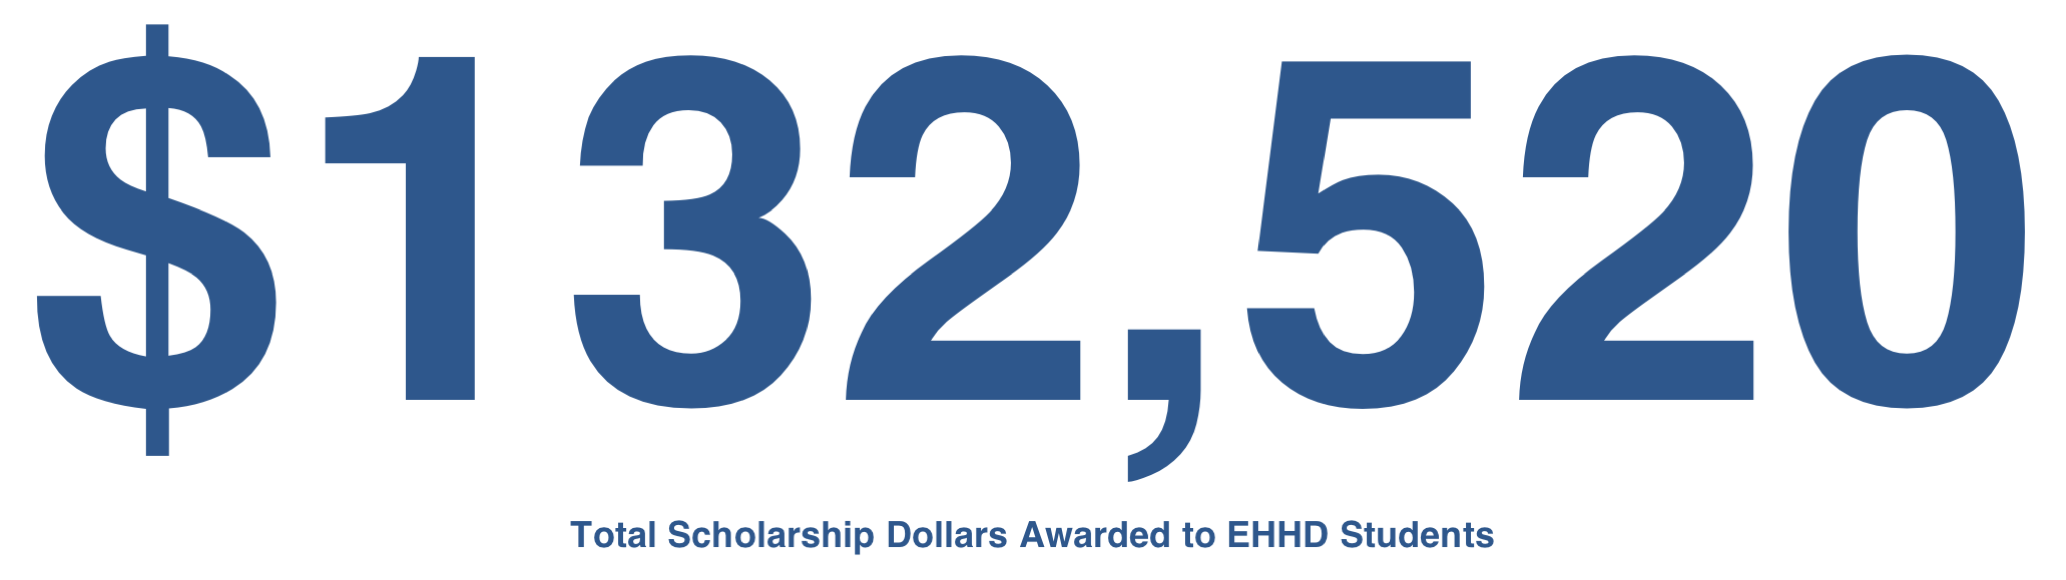 graphic display of $132,520 scholarships awarded to EHHD students in 2015-2016